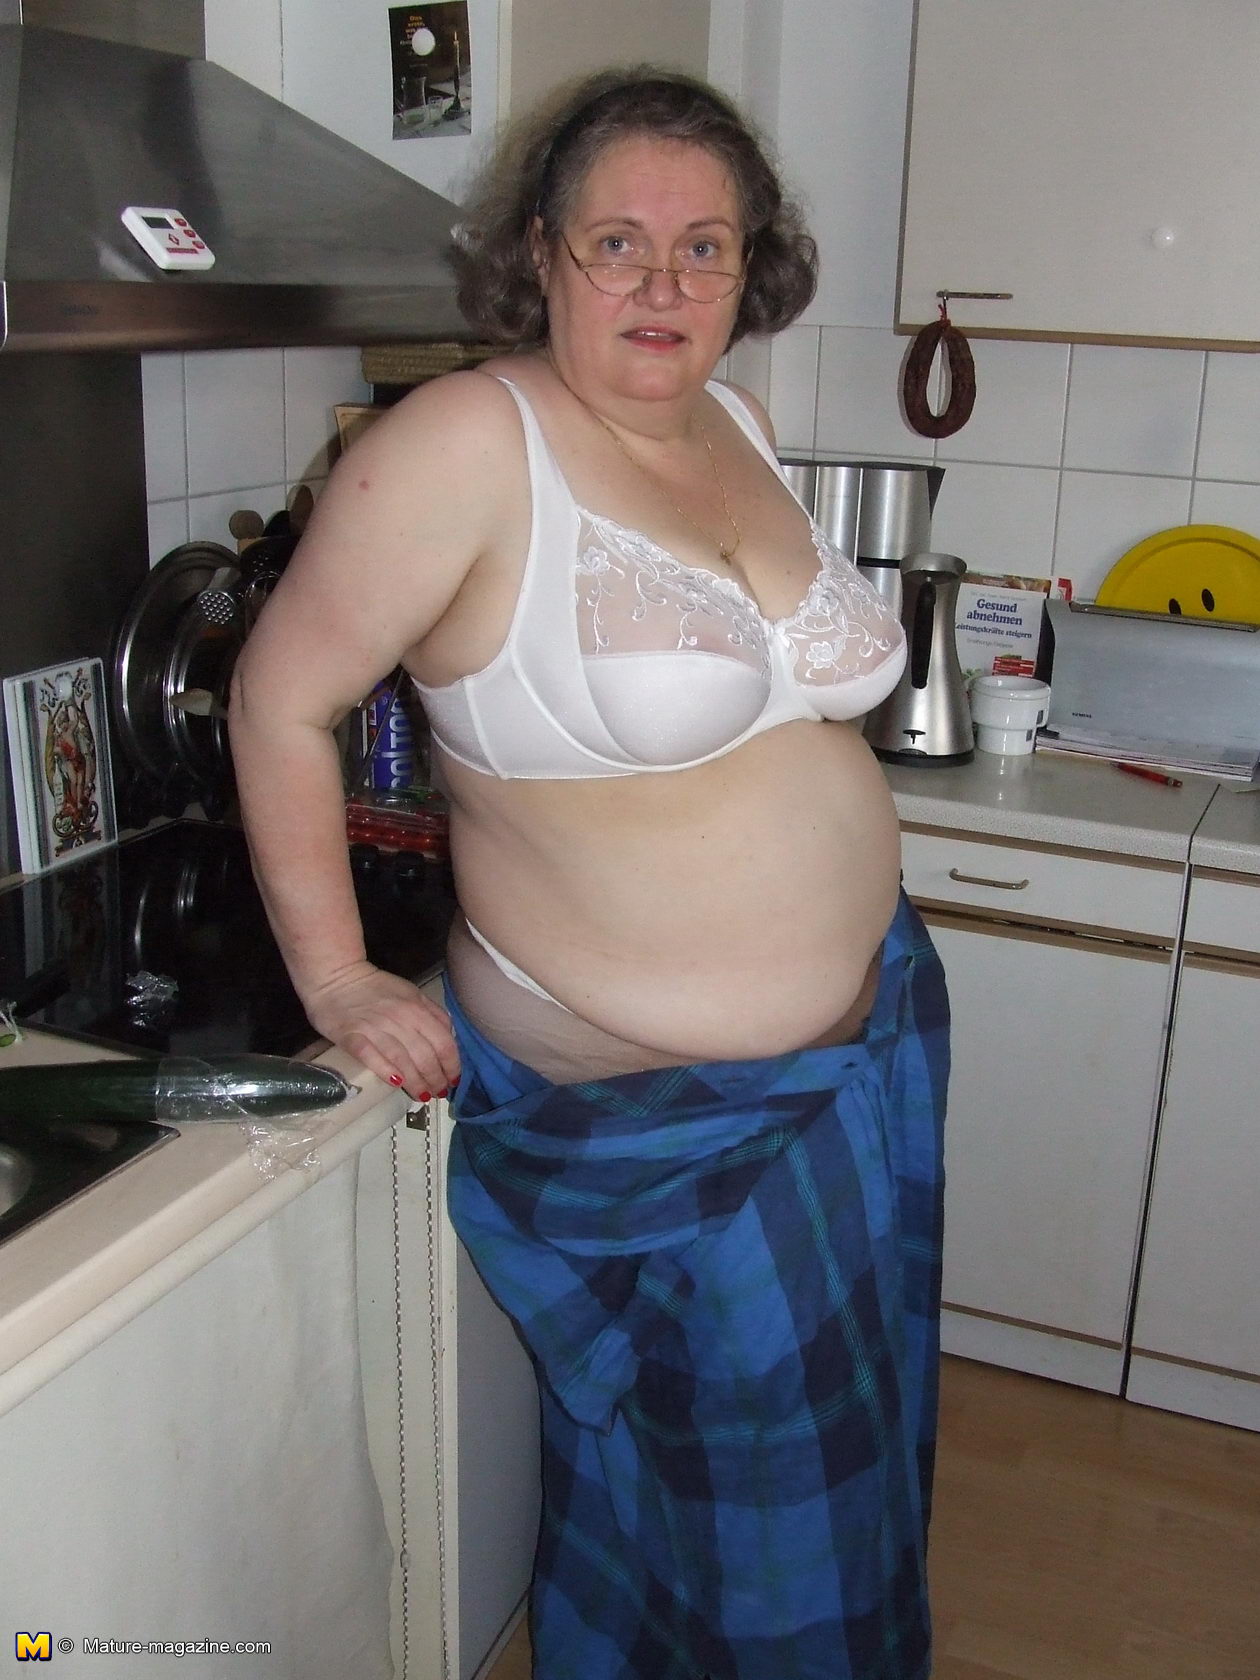 Amateur Chubby Granny - Amateur chubby housewife getting nasty in the kitchen ...